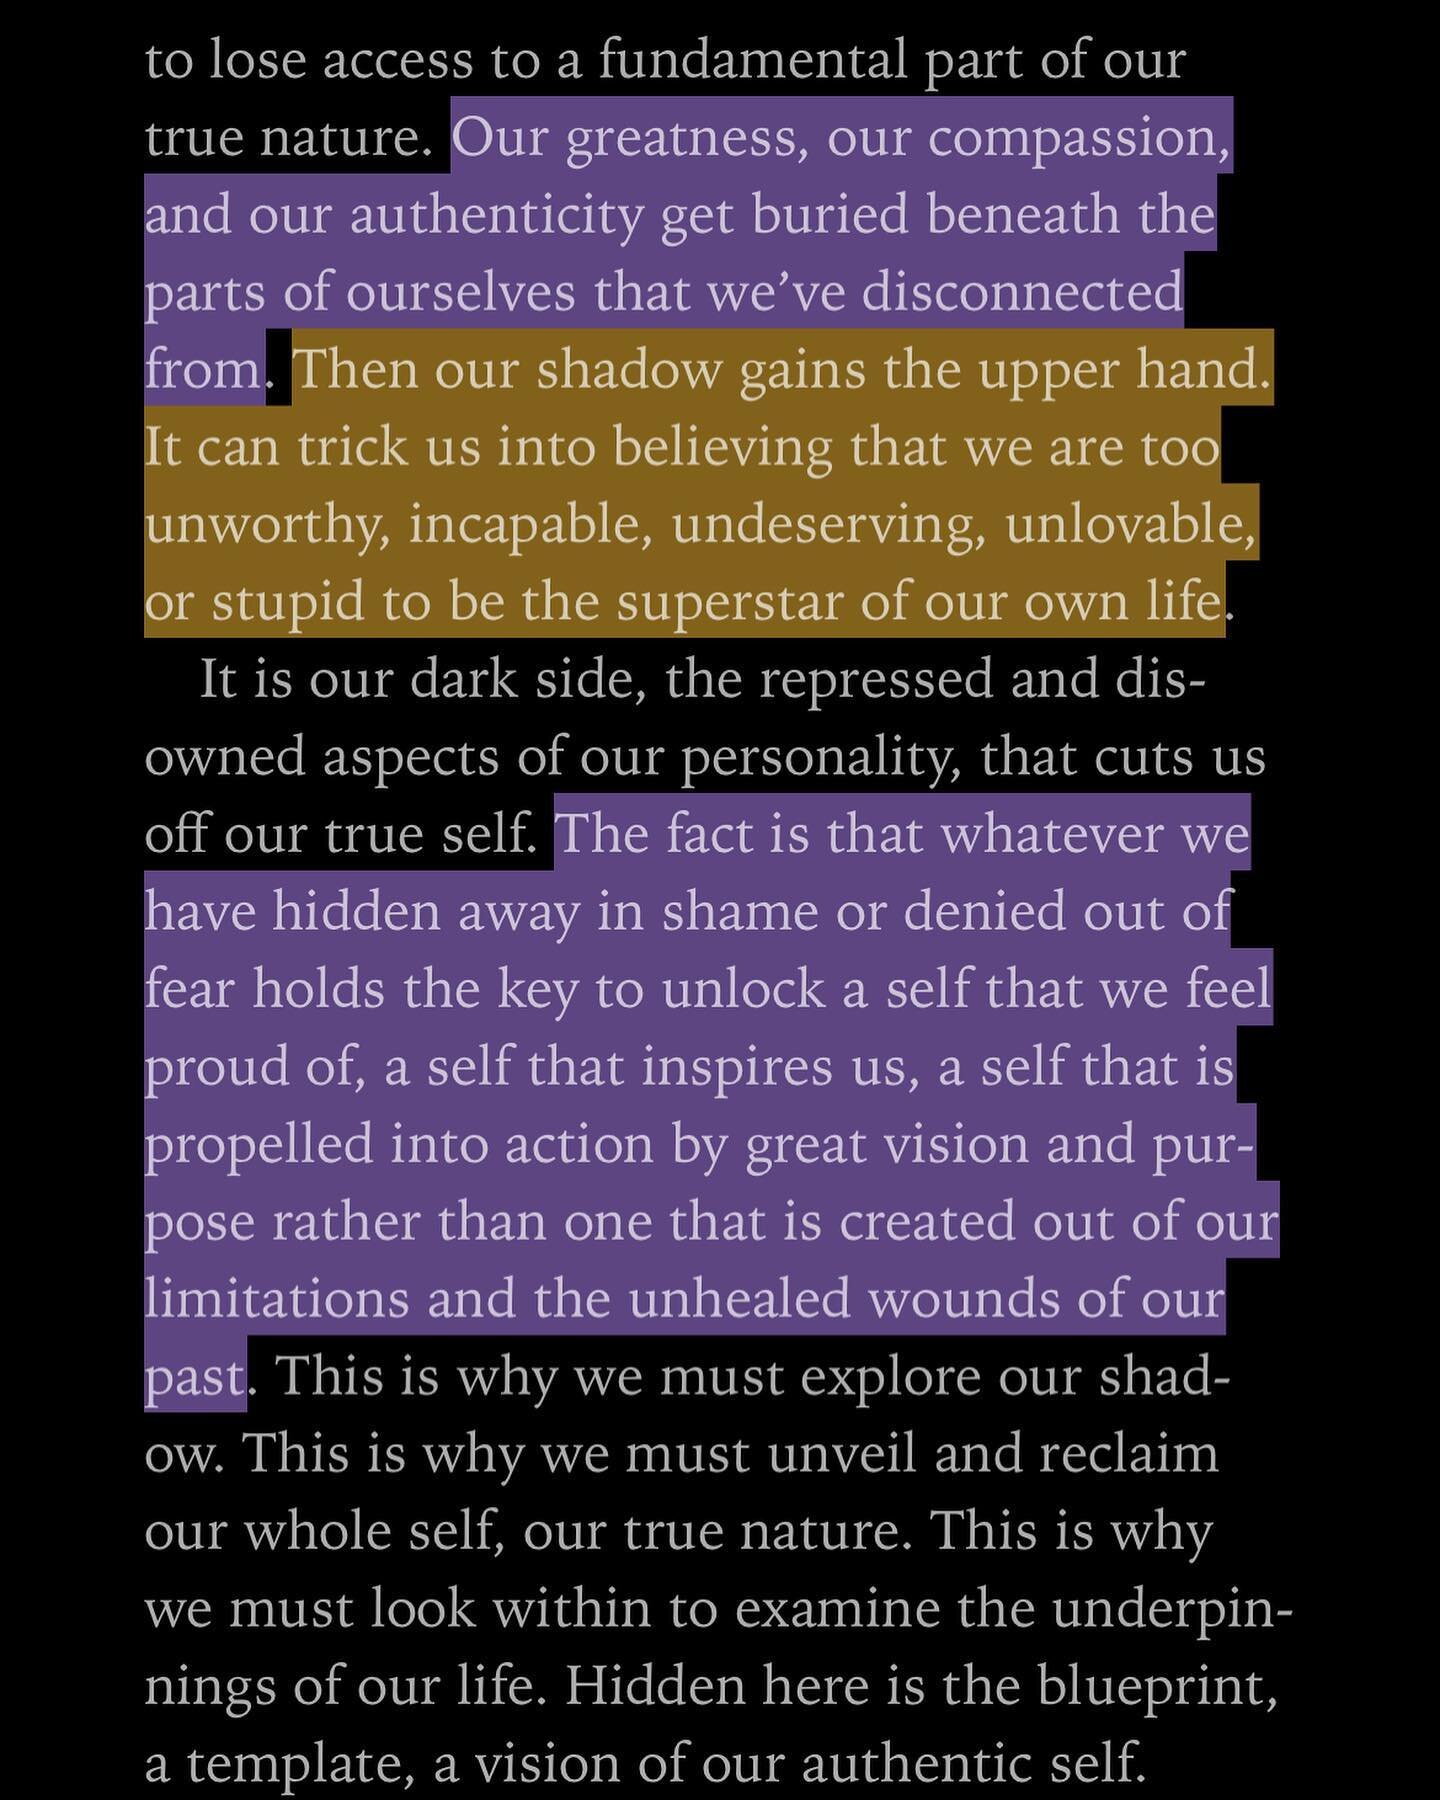 Amazing reads this morning. Learning more and more about the shadow and how it drags us down and makes us defeat ourselves. If you&rsquo;re in a shit place in life, gel free to reach out. I don&rsquo;t know everything, but I&rsquo;ve learned a ton th